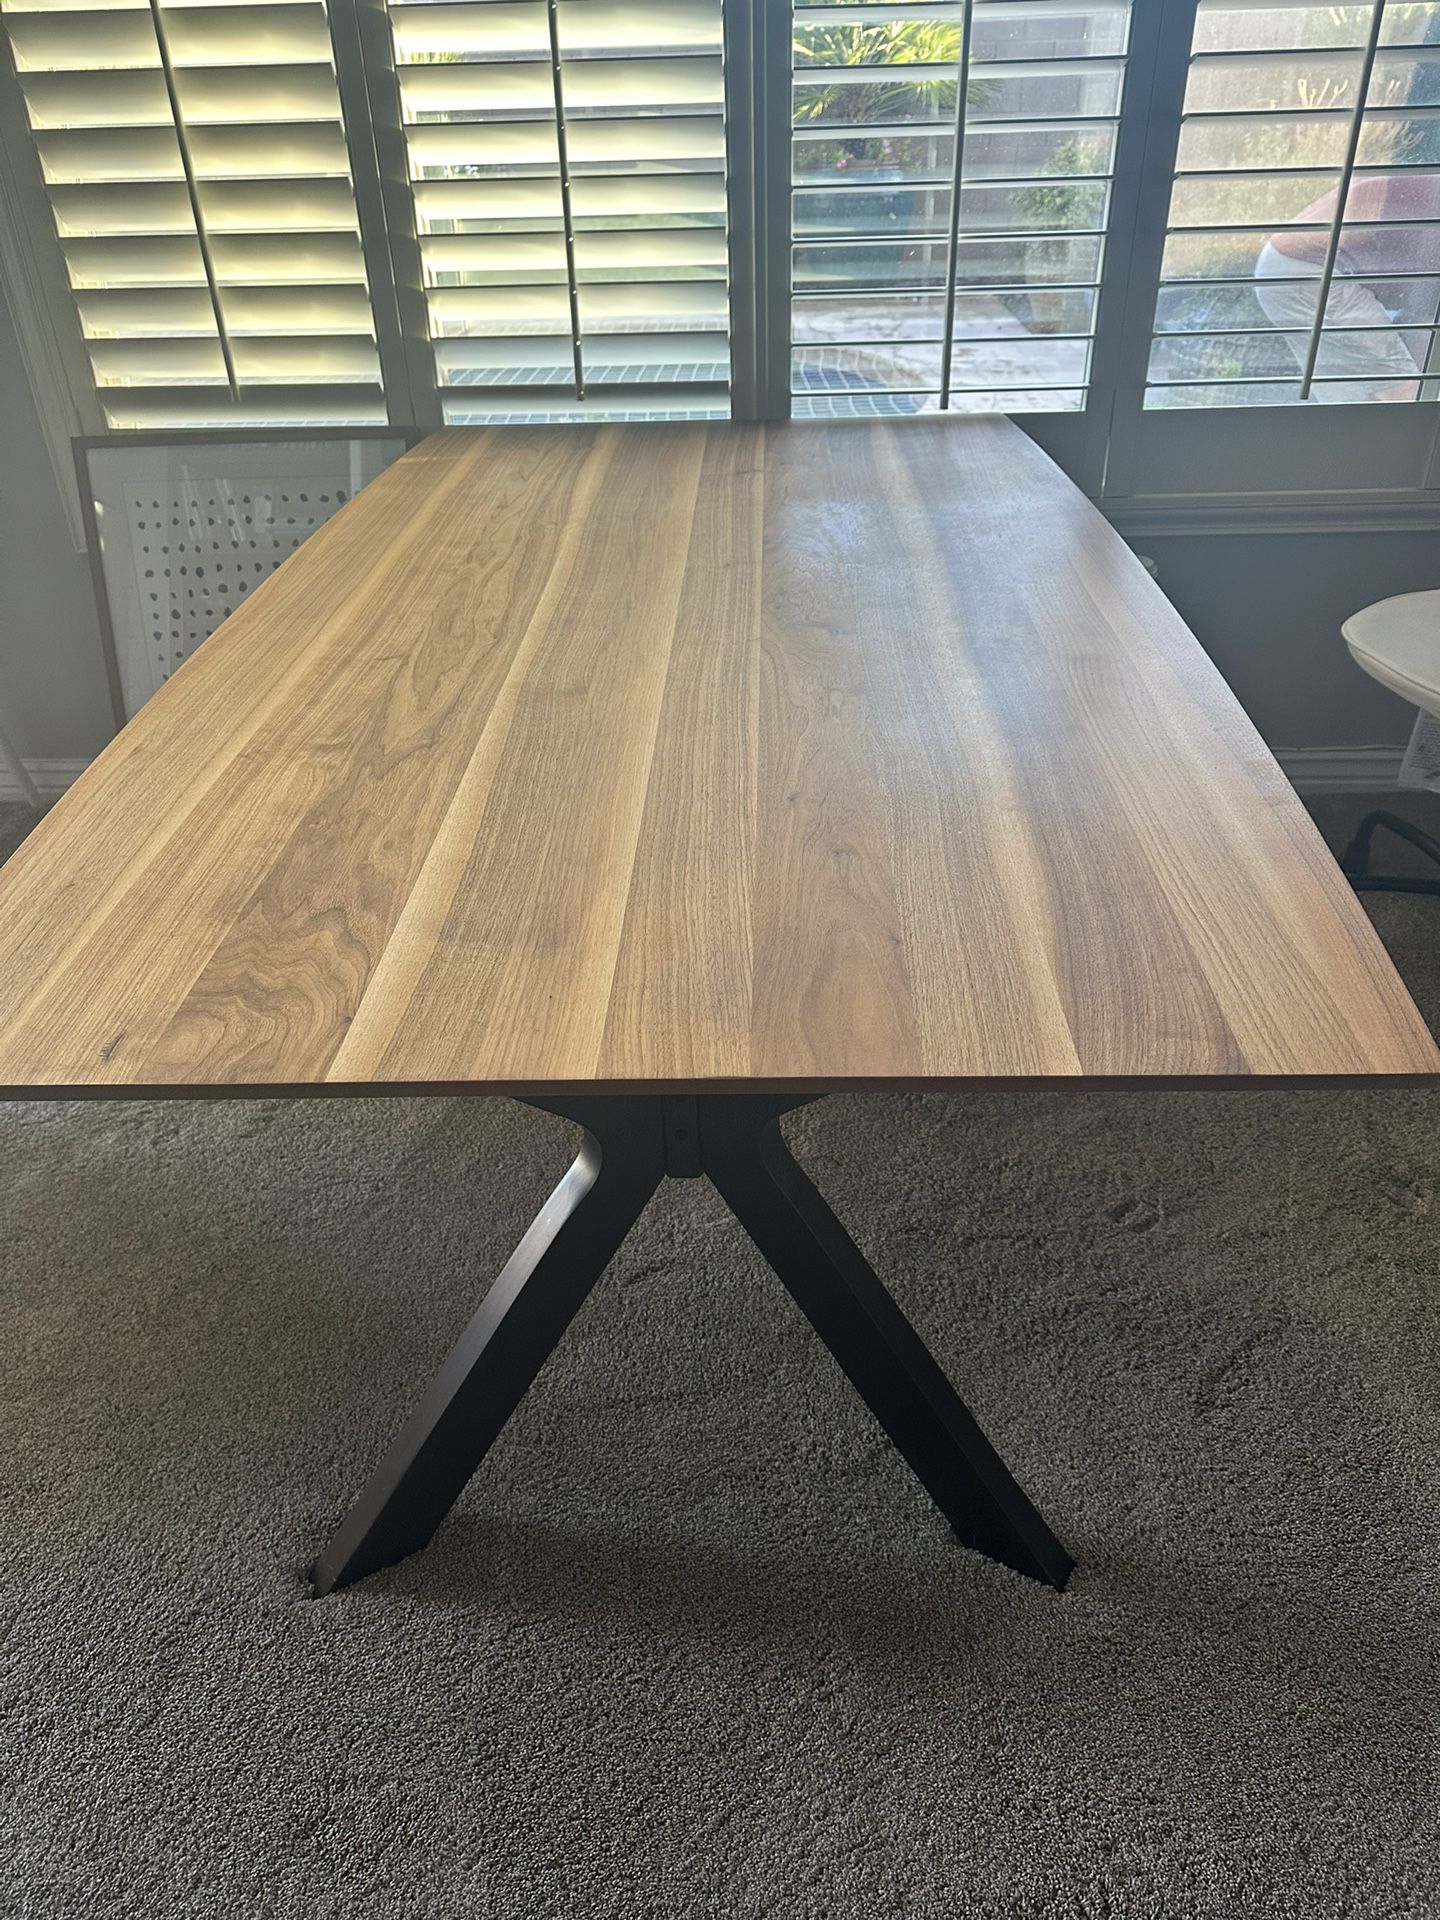 Table! Desk or Dining Table